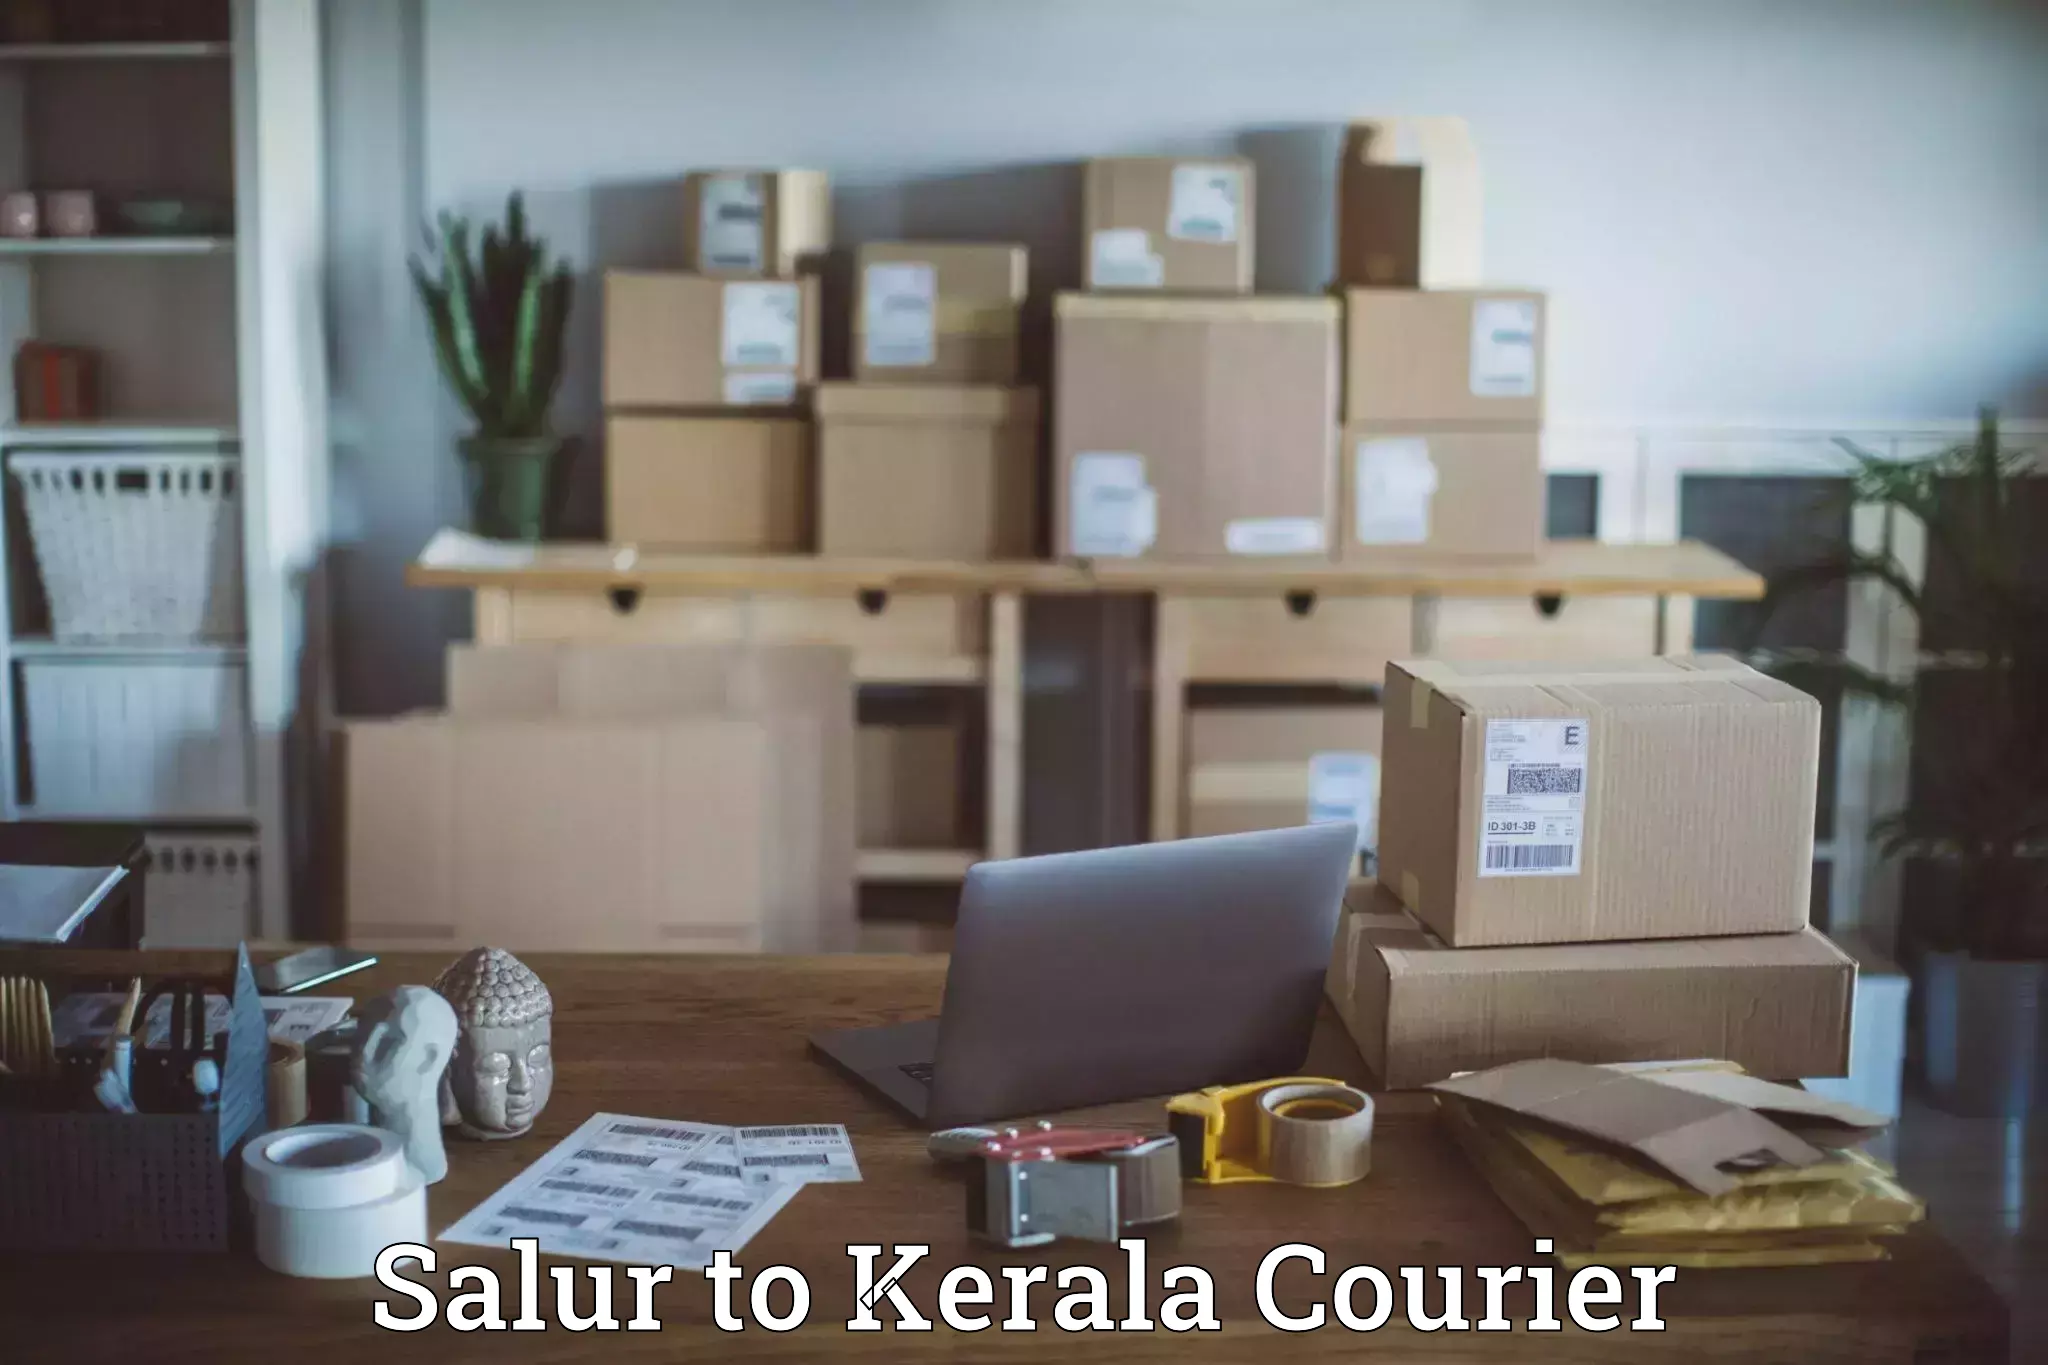 Automated parcel services Salur to Kollam